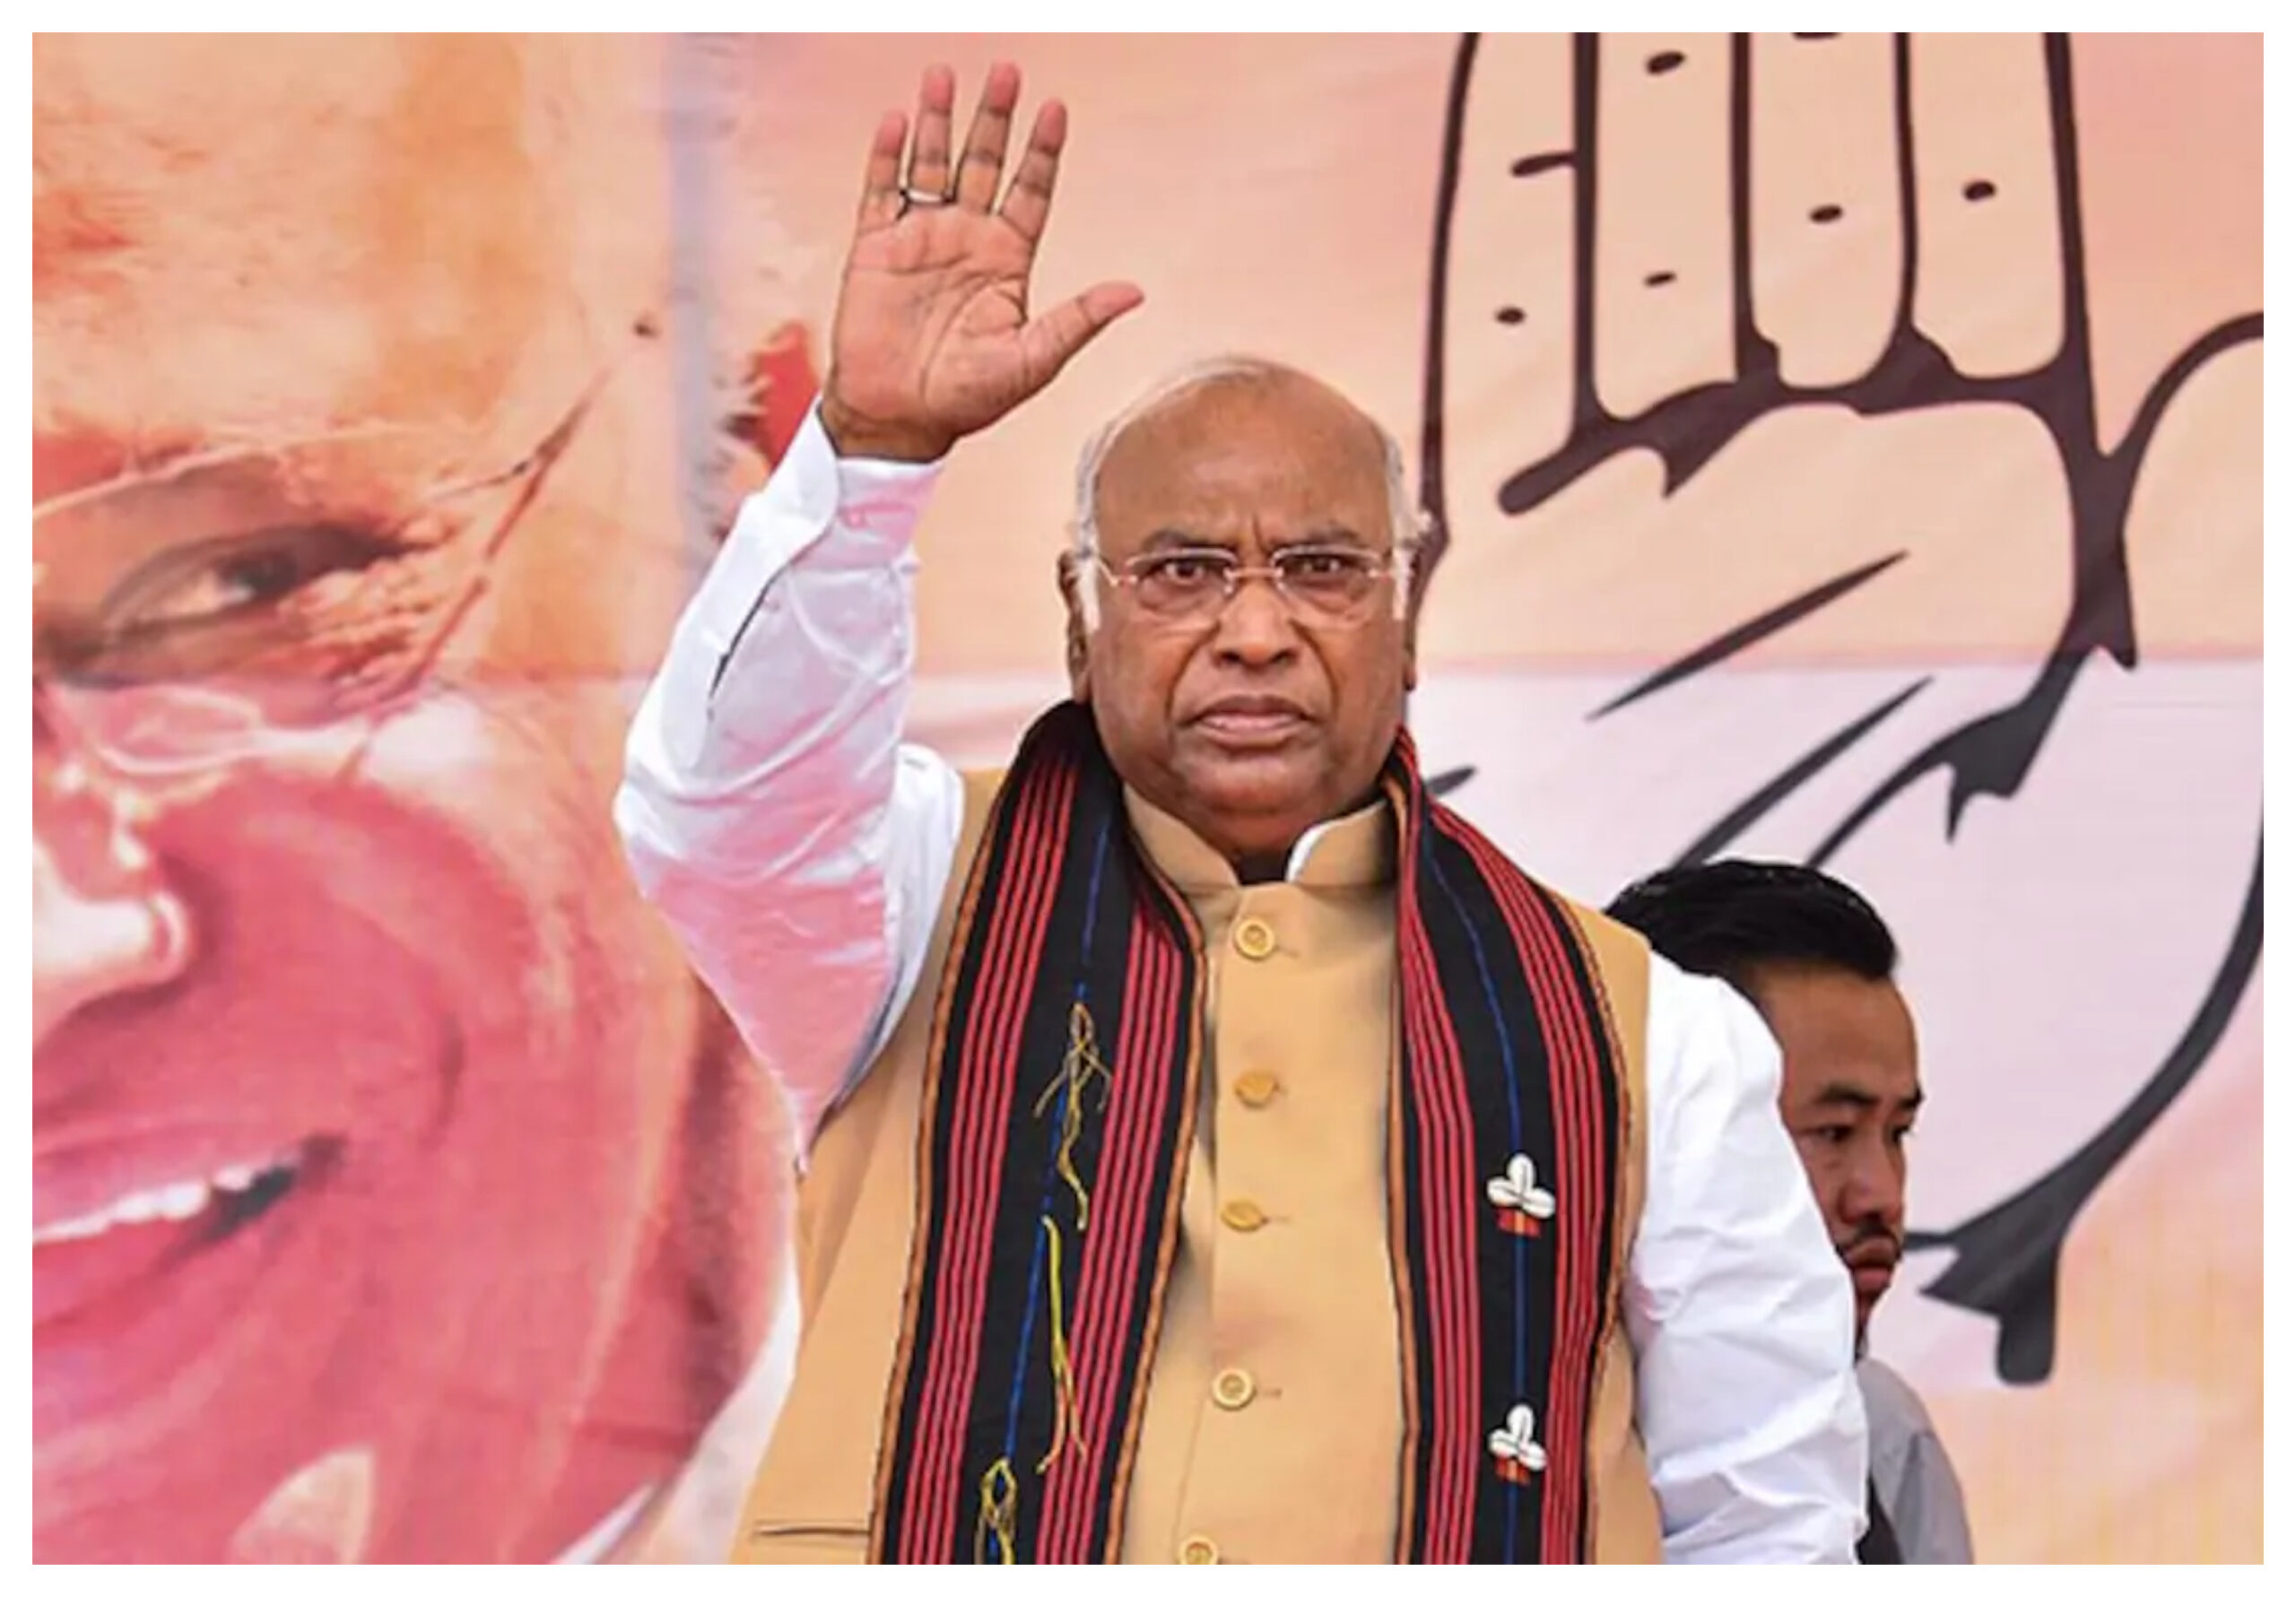 Congress: Mallikarjun Kharge said that people should unite and fight to remove Modi government. Politics news in hindi, totaltv news in hindi, bjp, congress